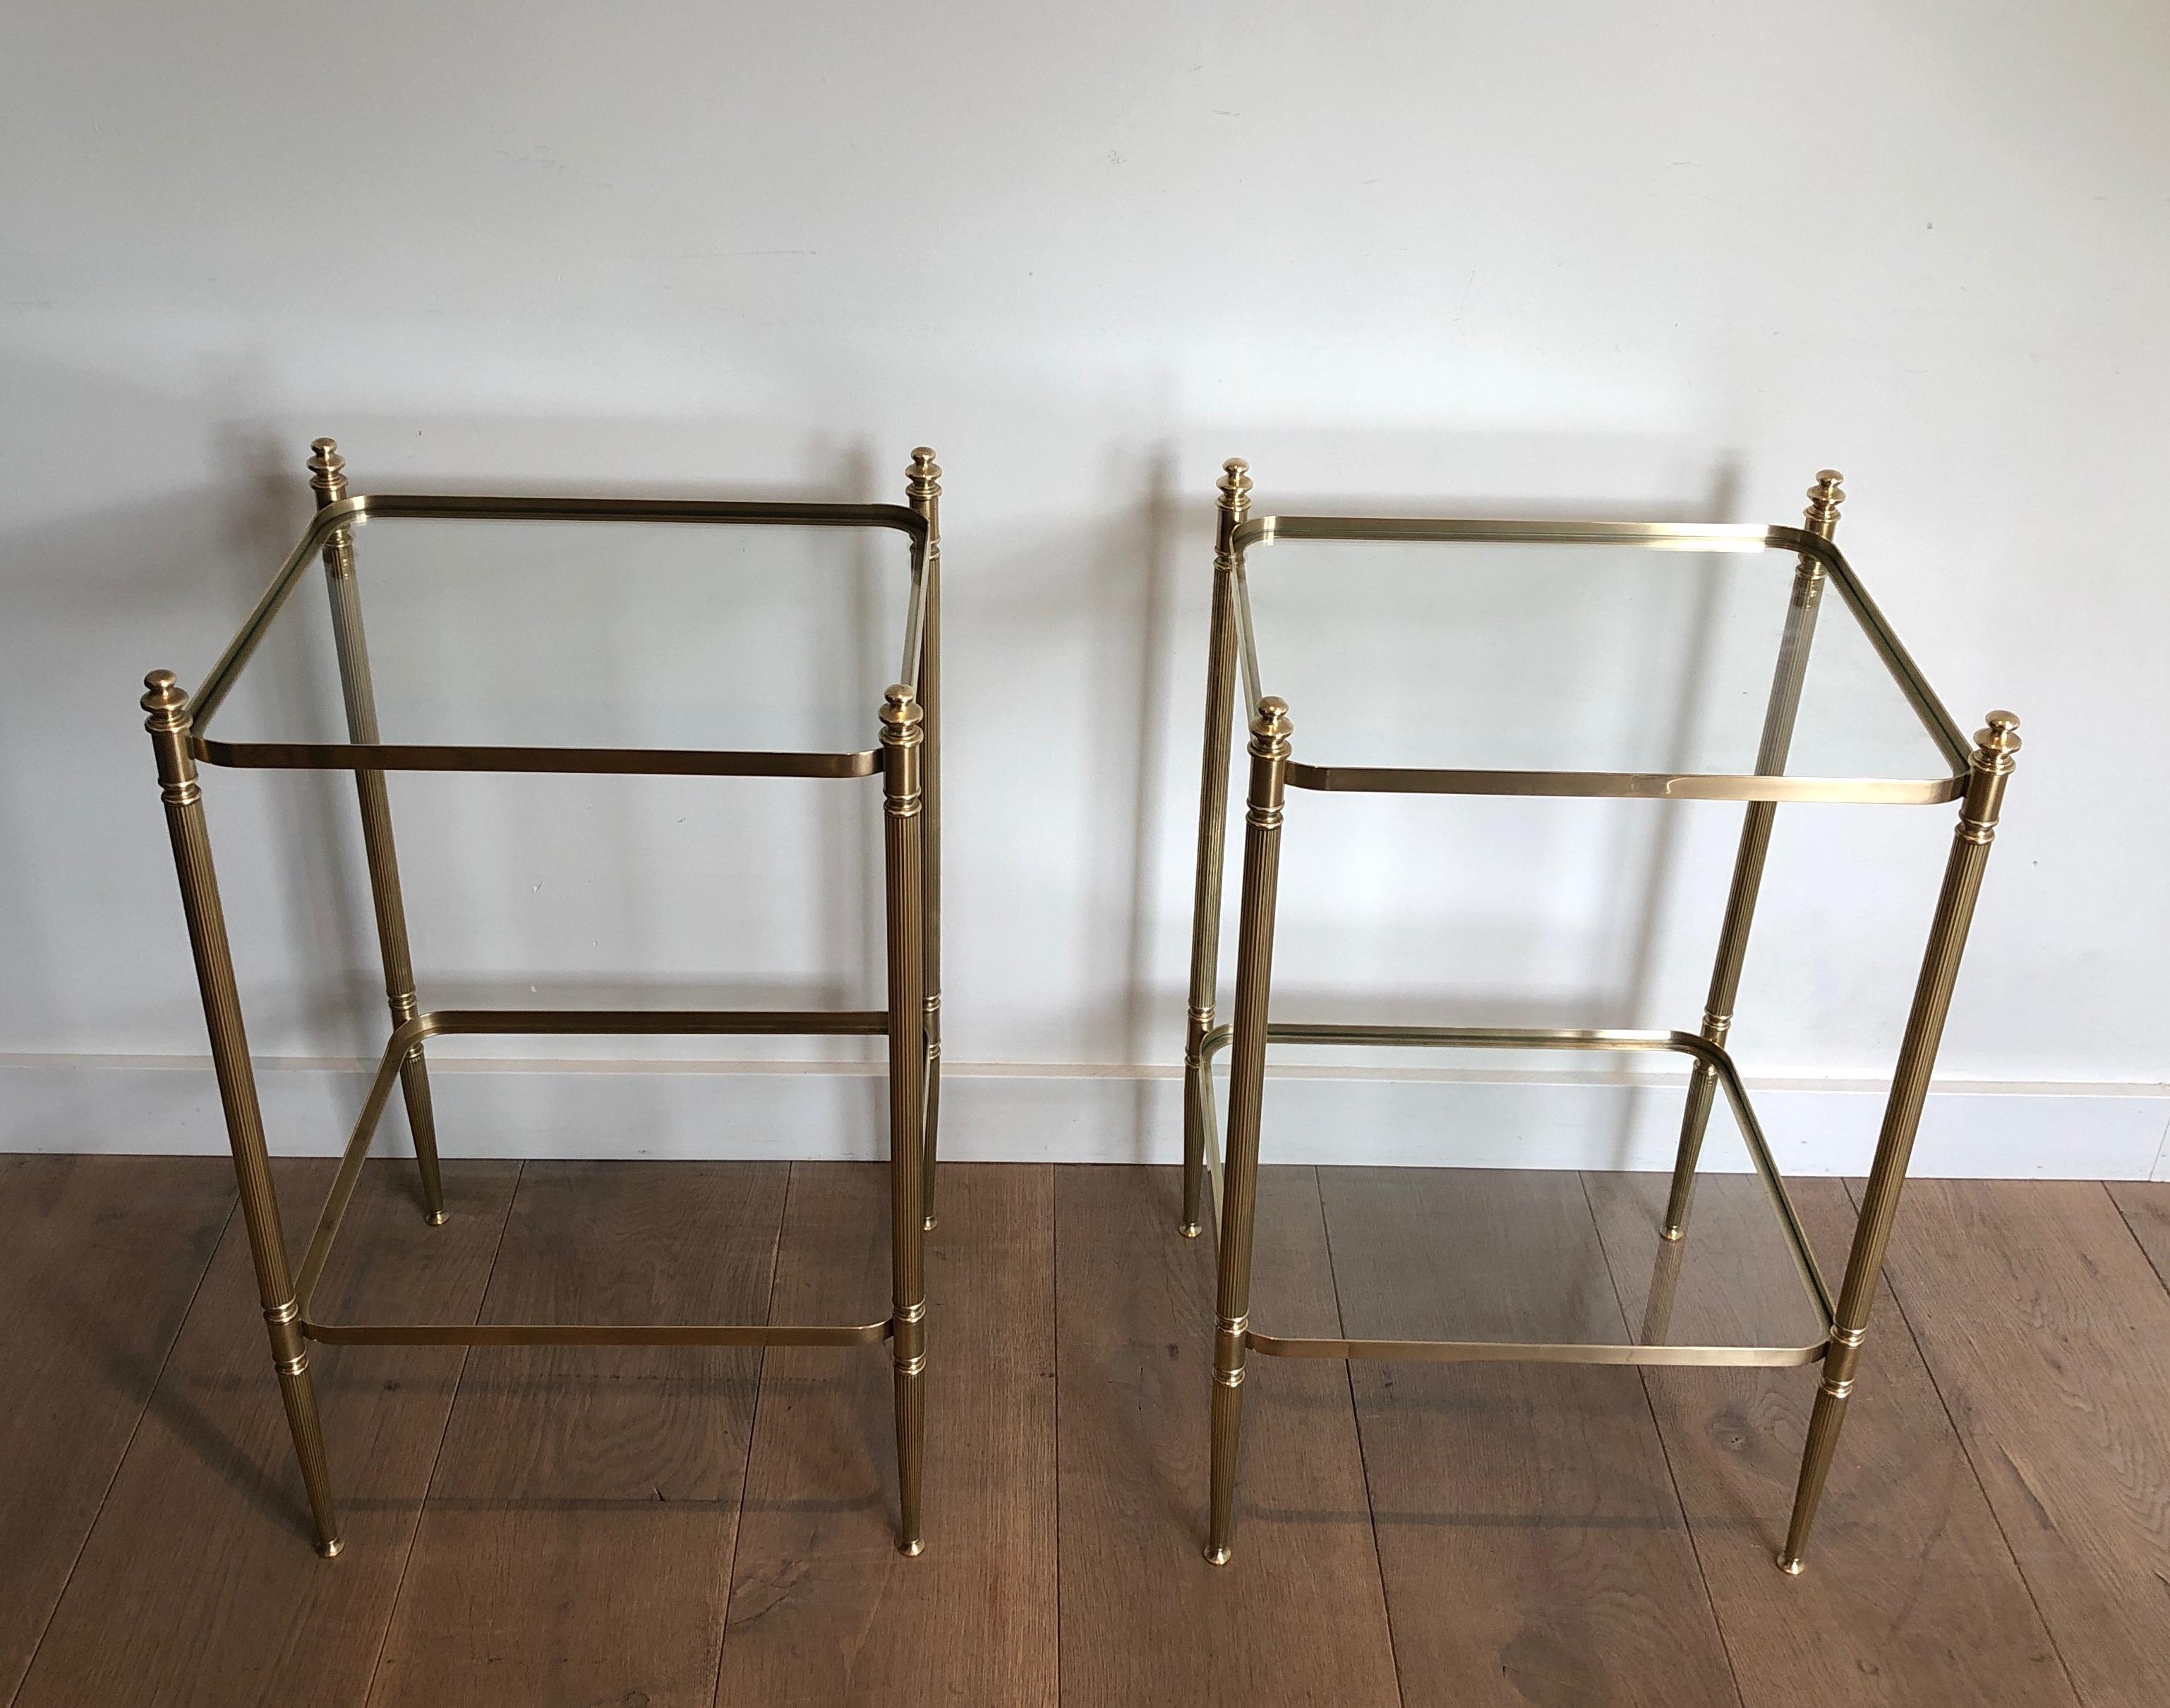 This very nice pair of neoclassical style side tables is made of brass with glass shelves. The tables are very elegant, rounded on the corners with fluted legs and nice finials. Both tables are in very good condition and have been perfectly